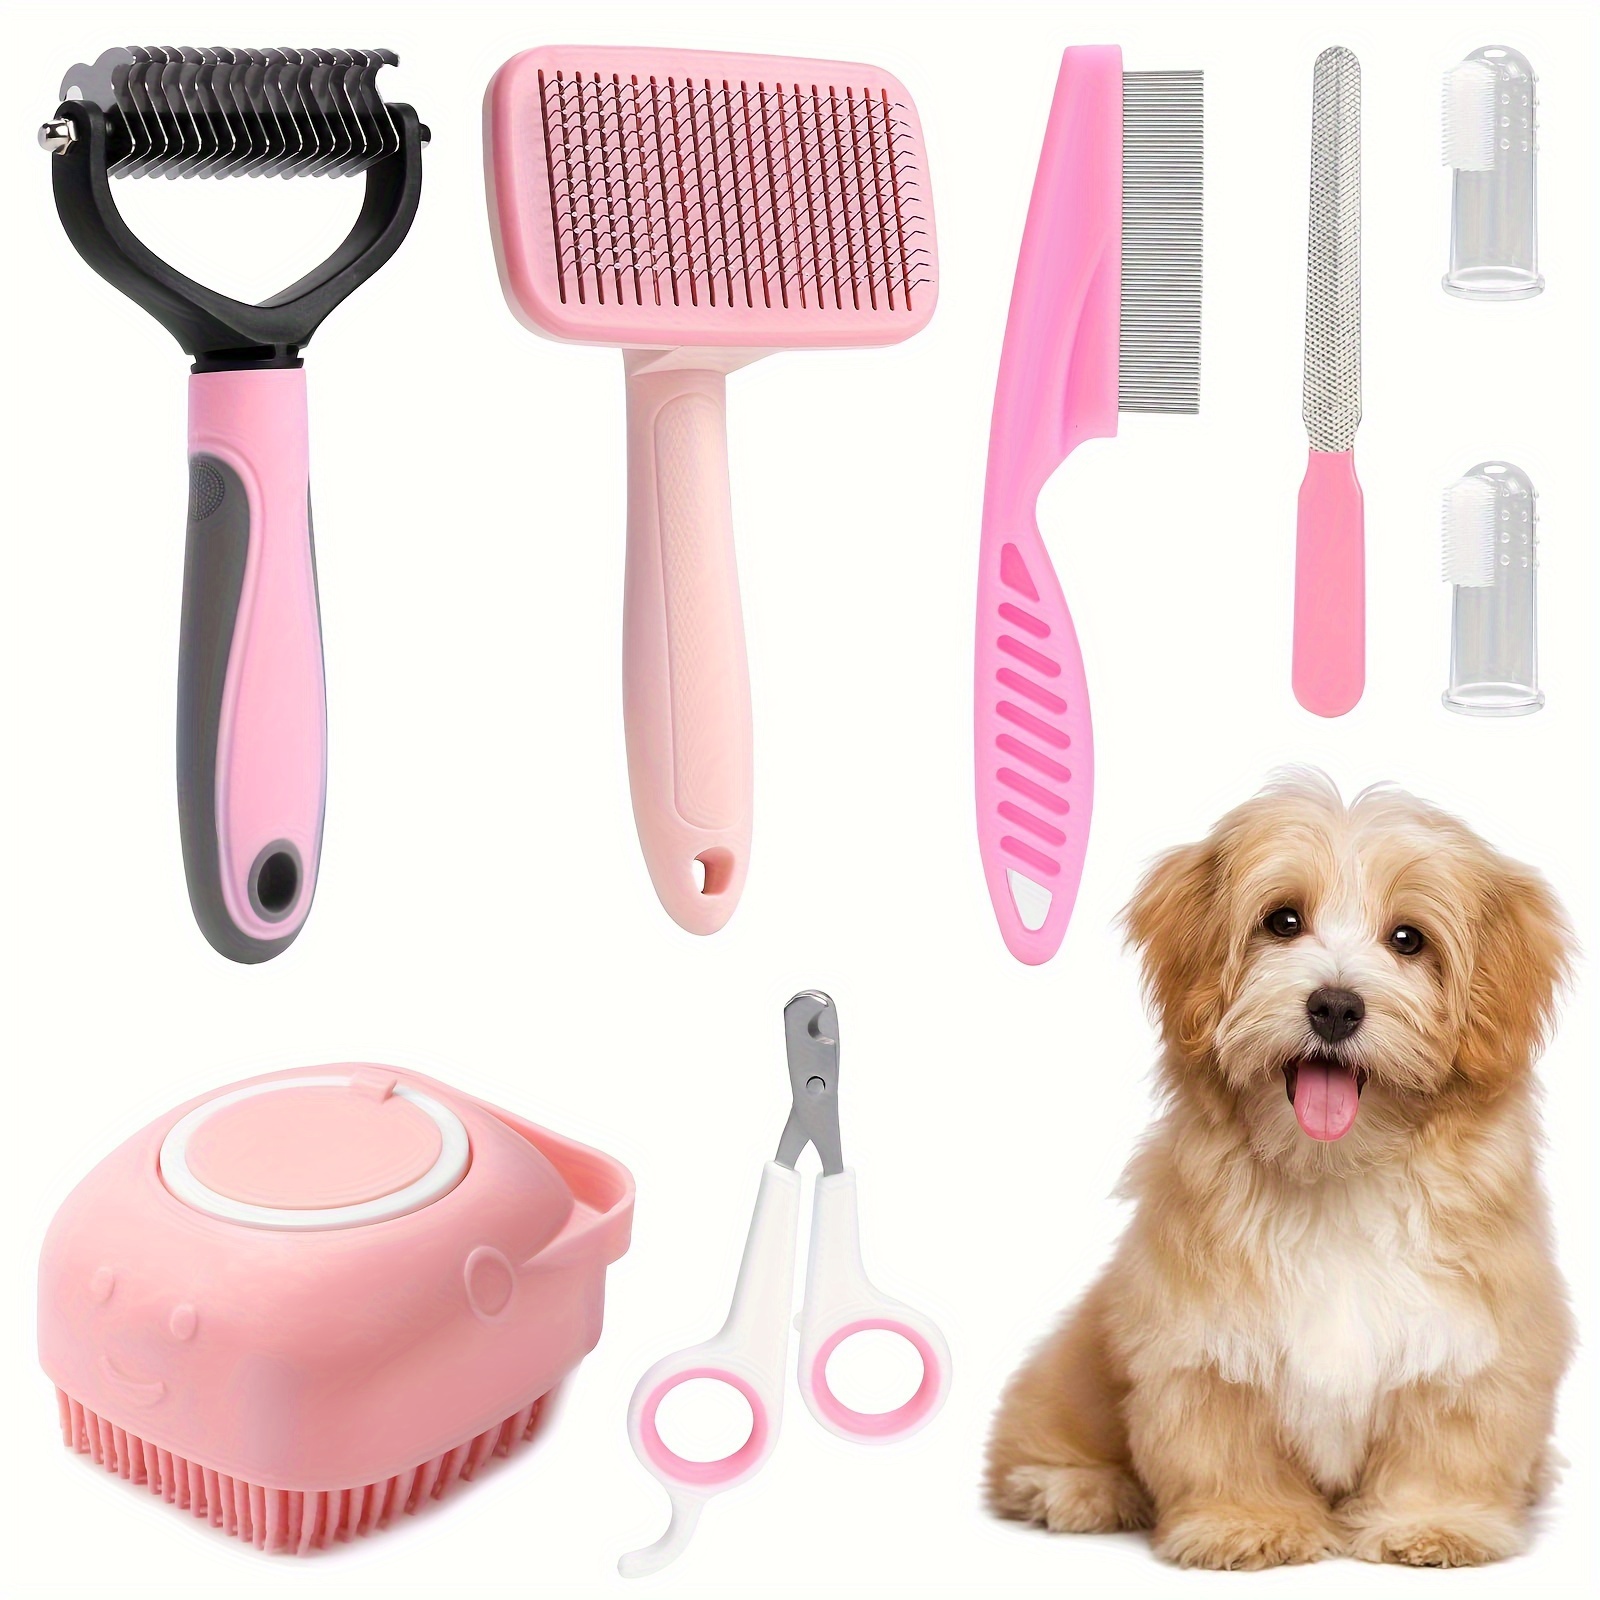 

Set Of 8 Dog Grooming Tools, Pet Self-cleaning Kit, With Pet Nail Clippers And File, Flea Comb, Pet Shampoo Bath Brush, Pet Shedding Brush, Pet Hair Removal Comb, Silicone Toothbrush